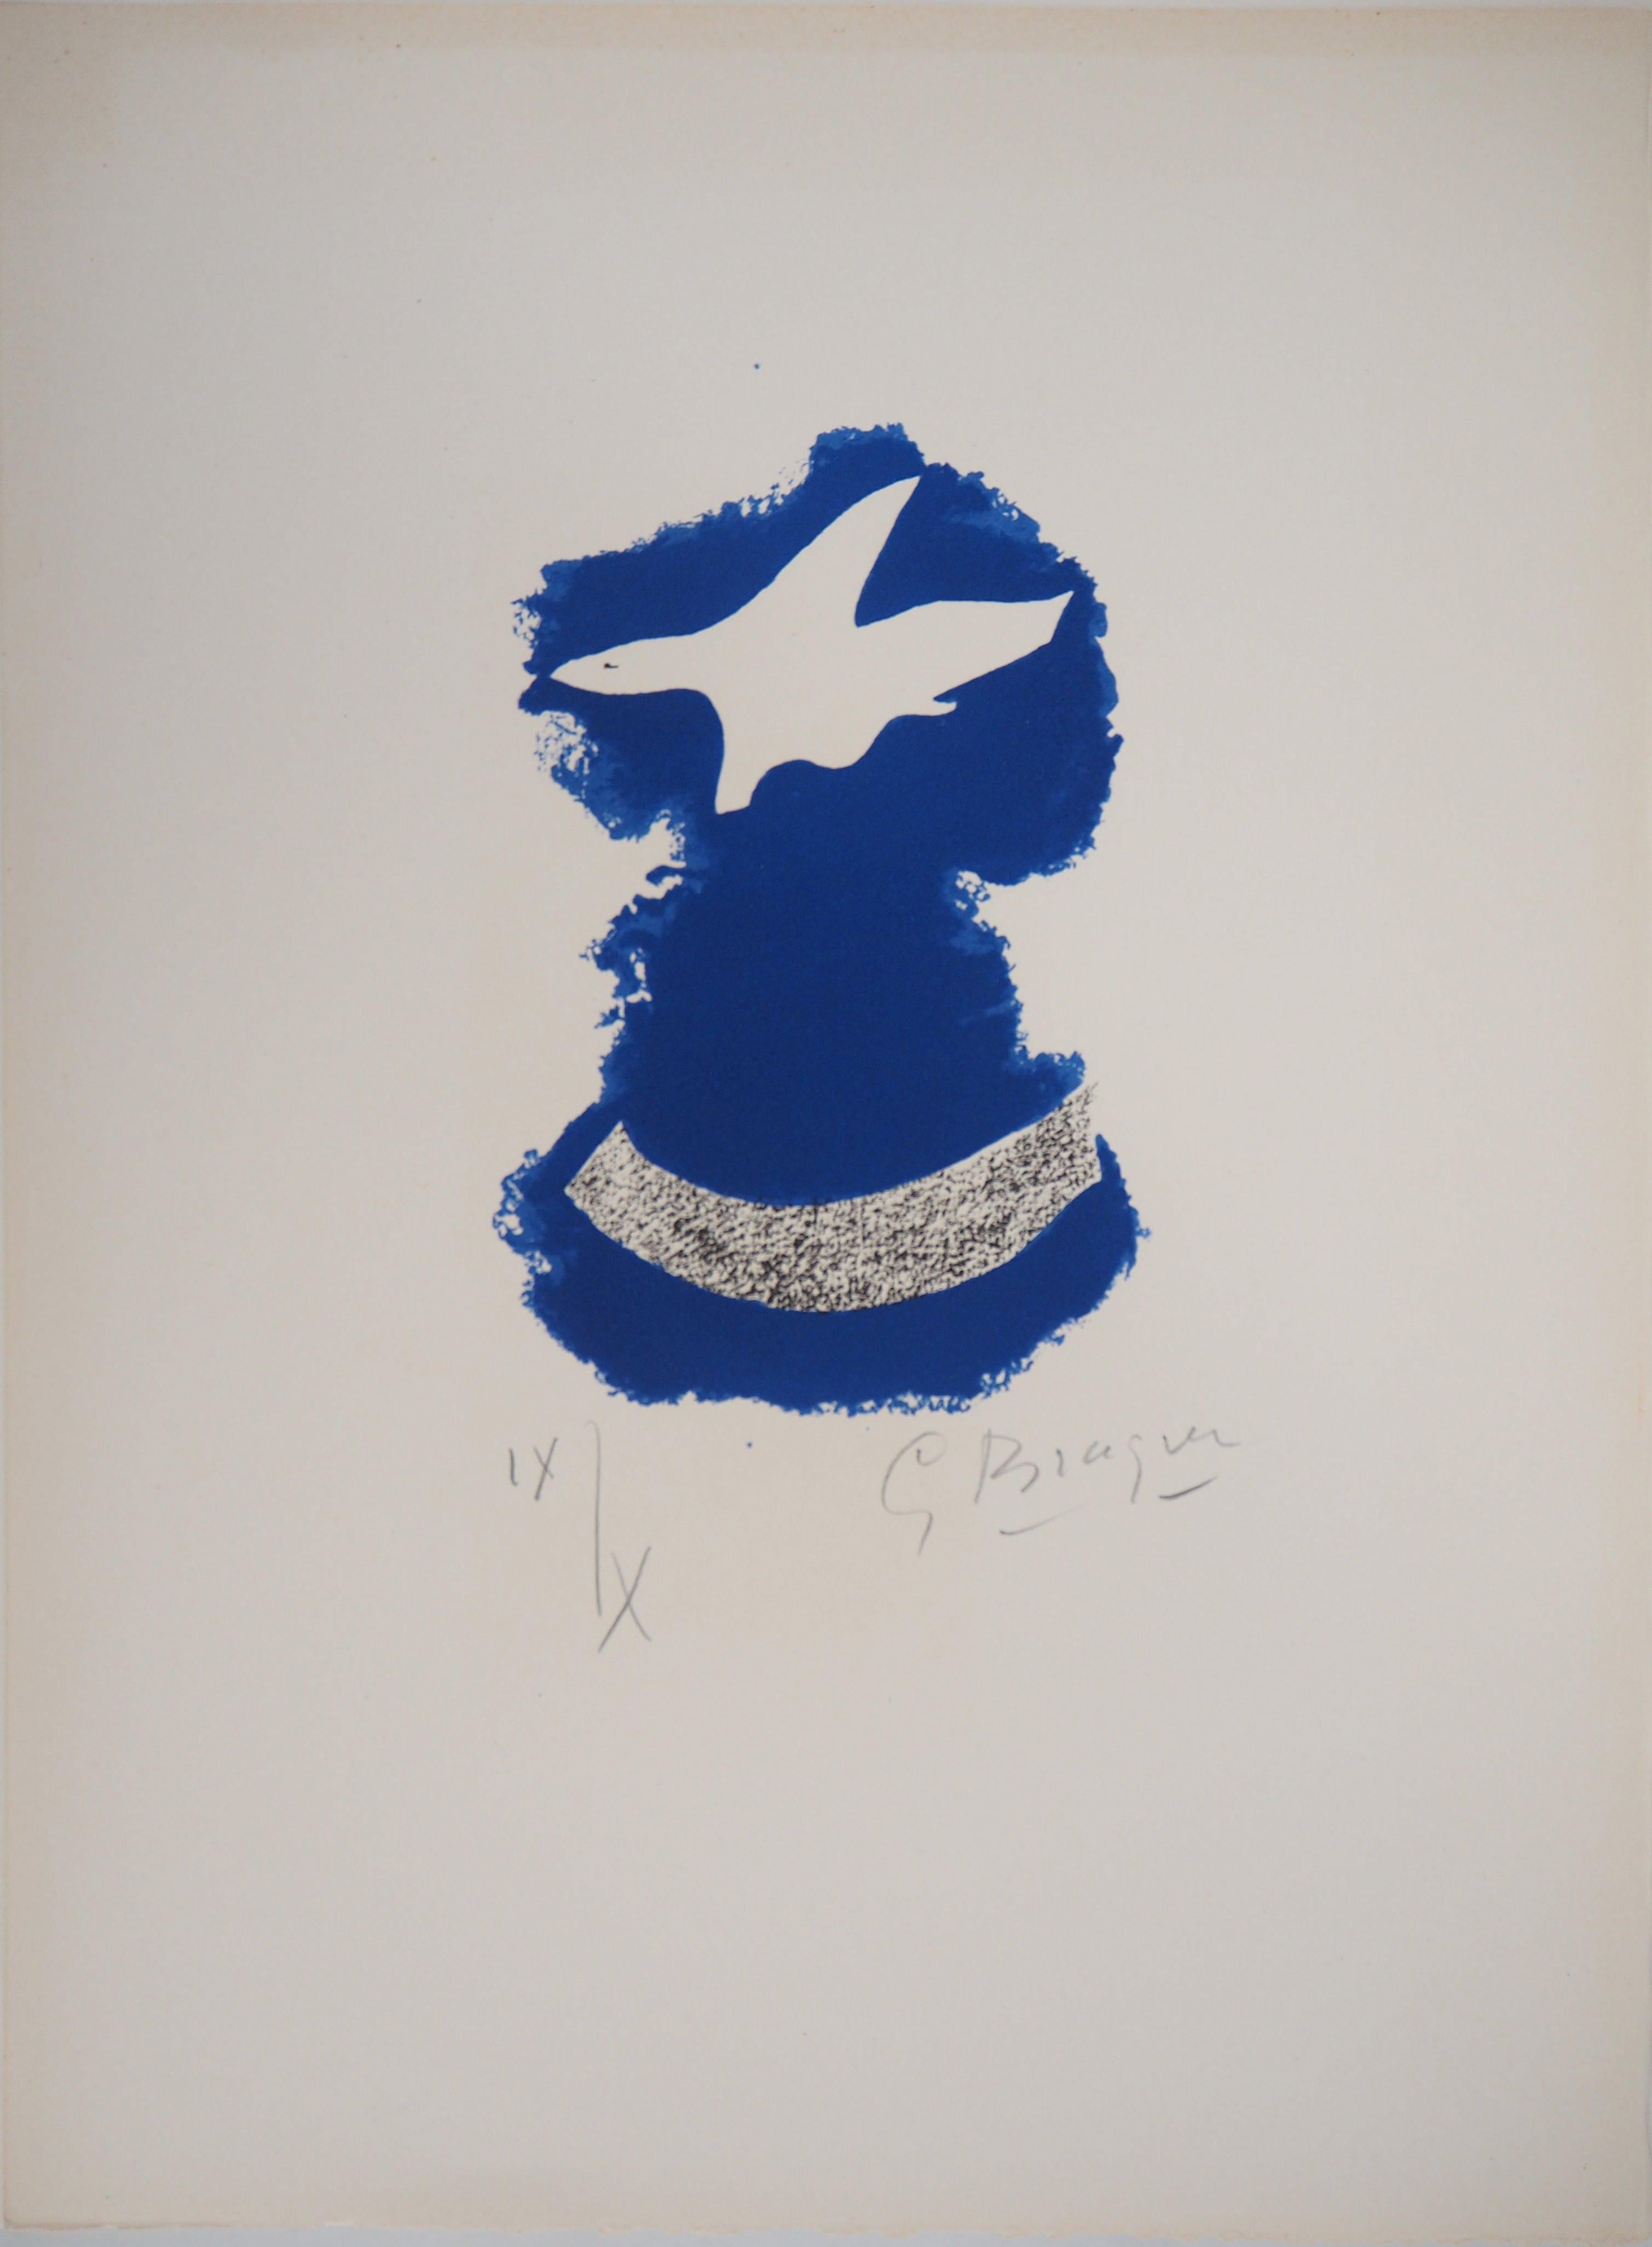 Bird Flying Over Sea - Original lithograph, Handsigned, Ltd / 10 (Mourlot #87) - Print by Georges Braque